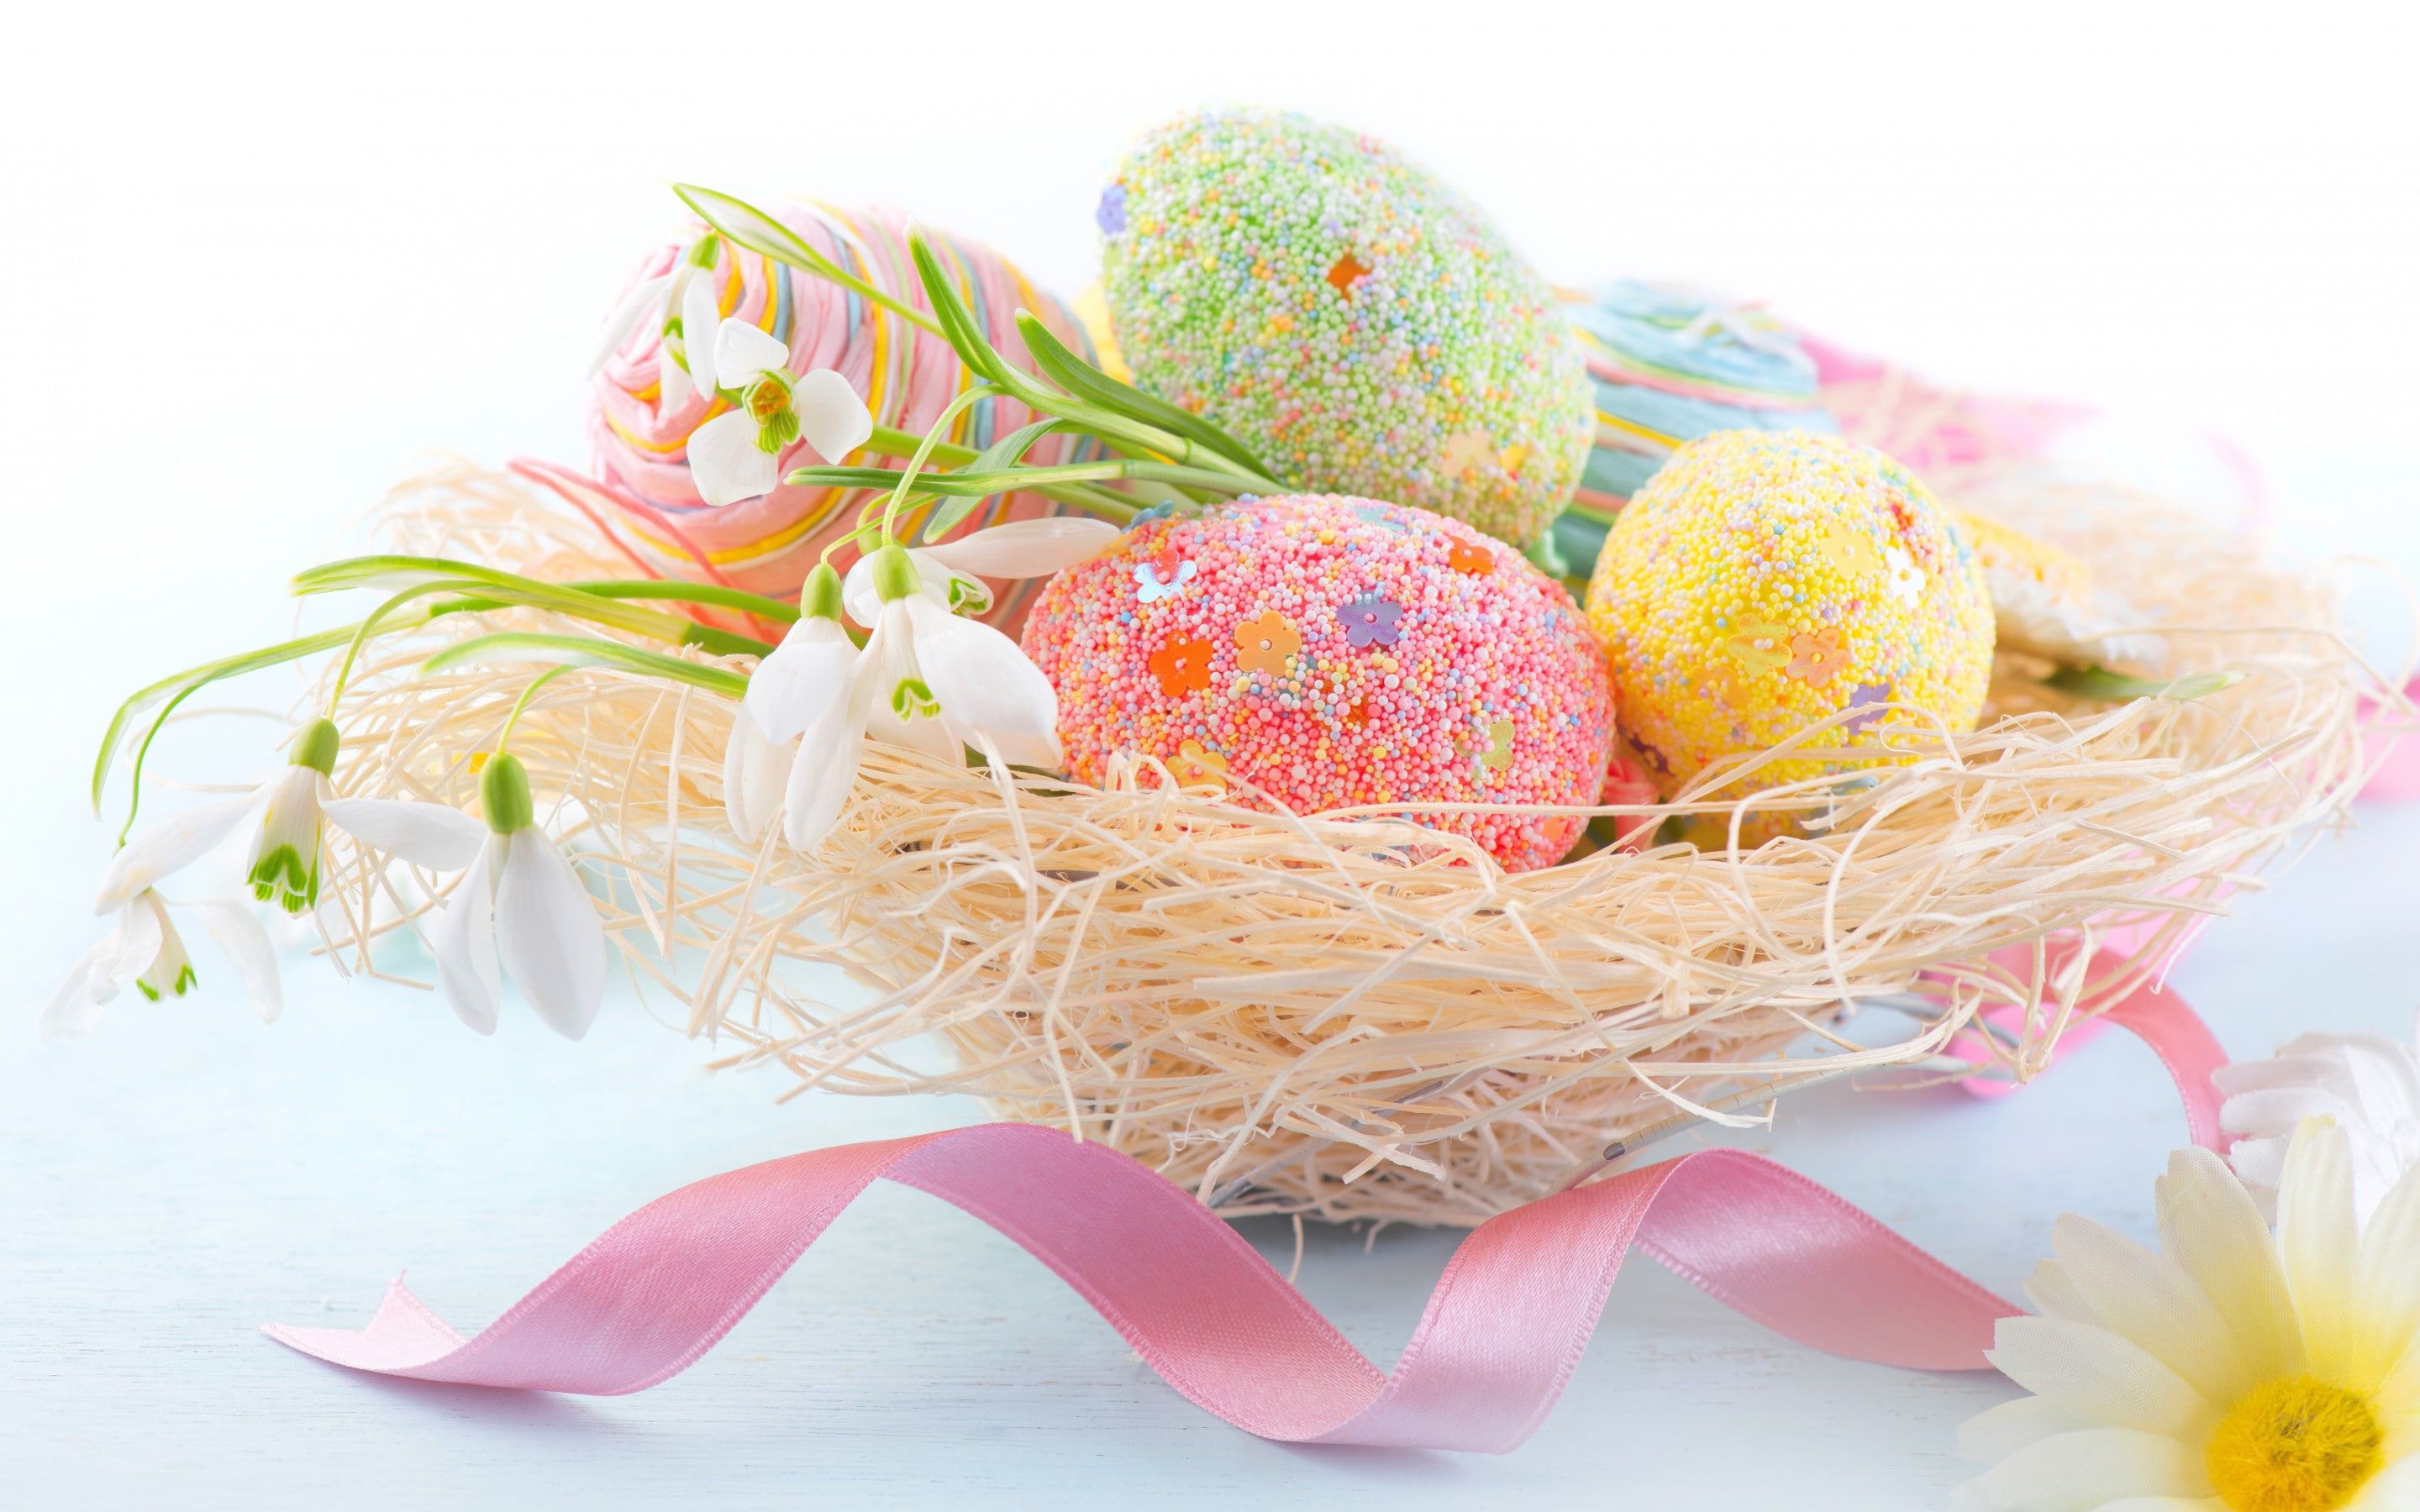 Holidays, Easter, Eggs, white petaled flower and faberge eggs #Eggs #spring #flowers #Holidays #Easter #eggs. Easter eggs, Easter egg decorating, Easter egg gifts